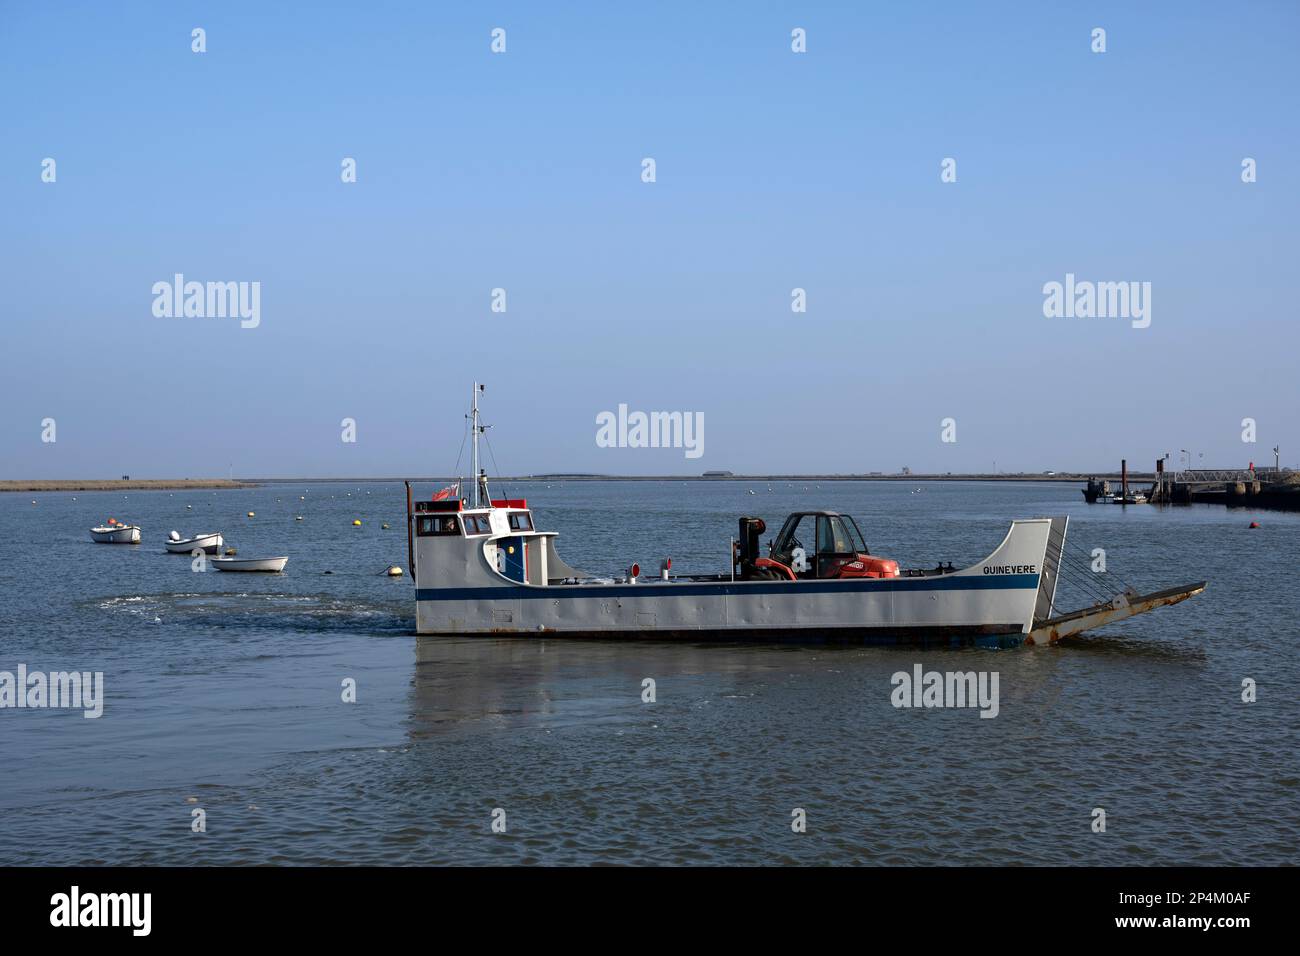 Landing craft used to transport equipment from Orford to Orfordness across the river Ore, Suffolk, UK. Stock Photo